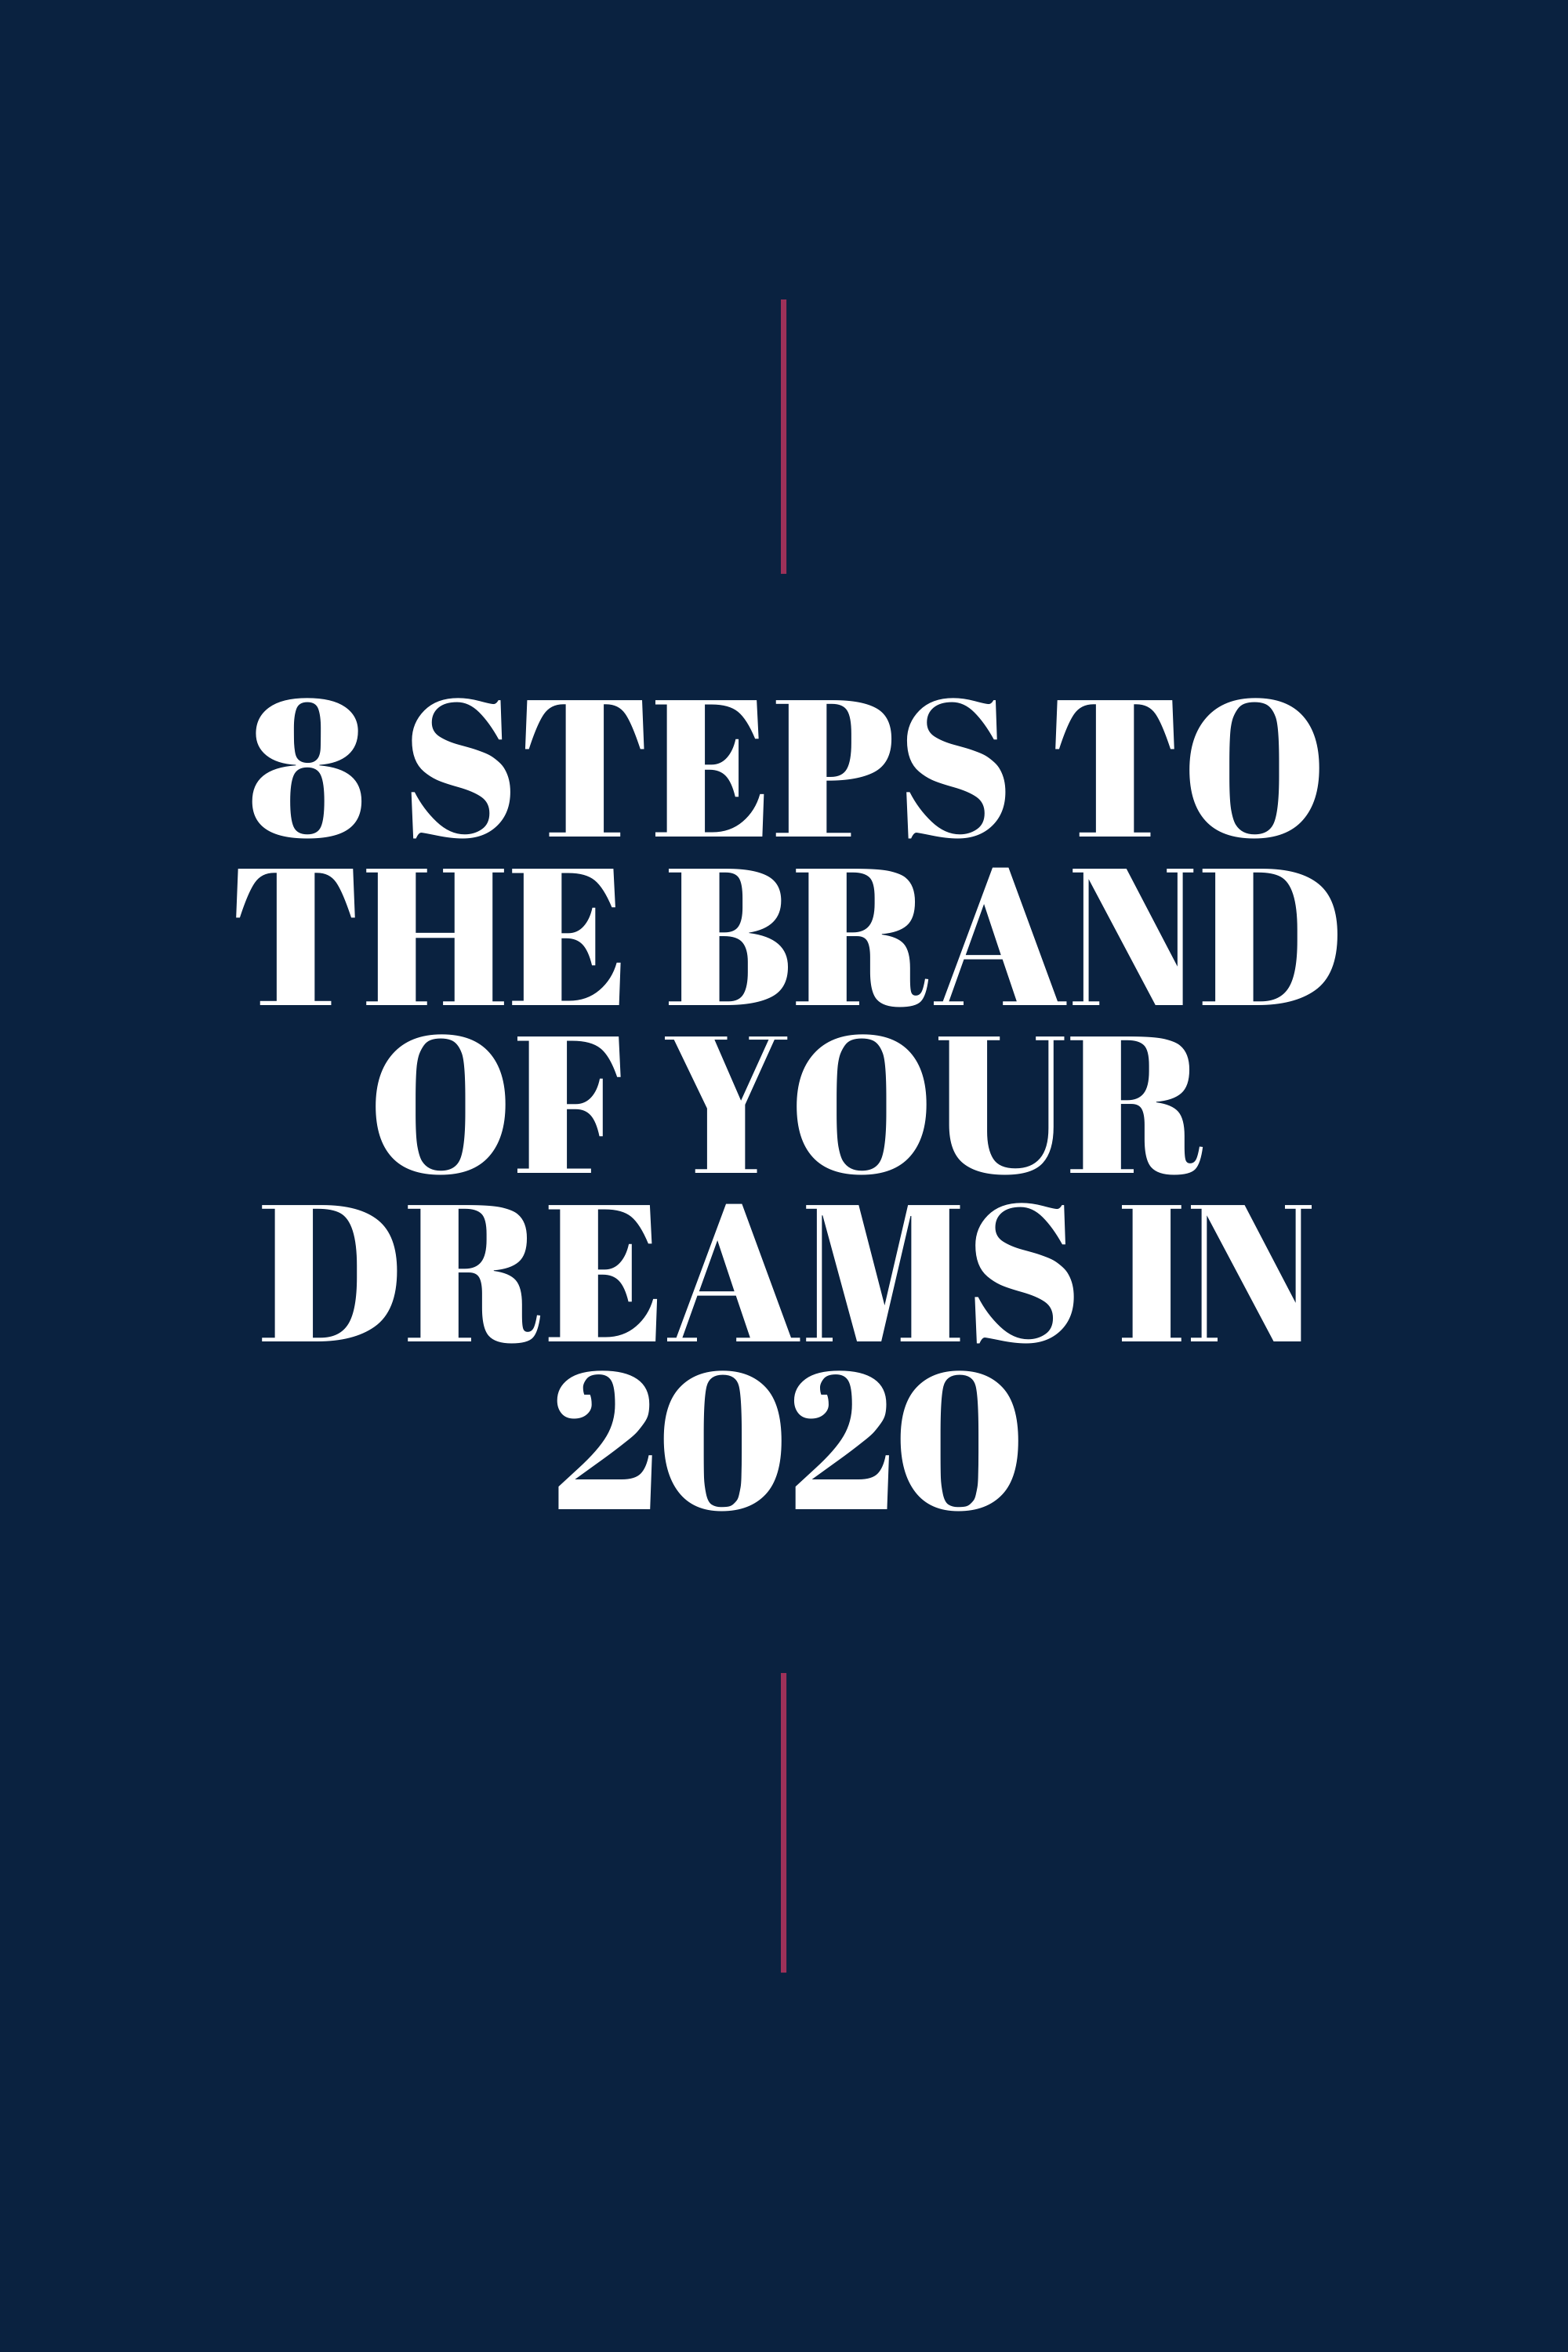 8 steps to the brand of your dreams